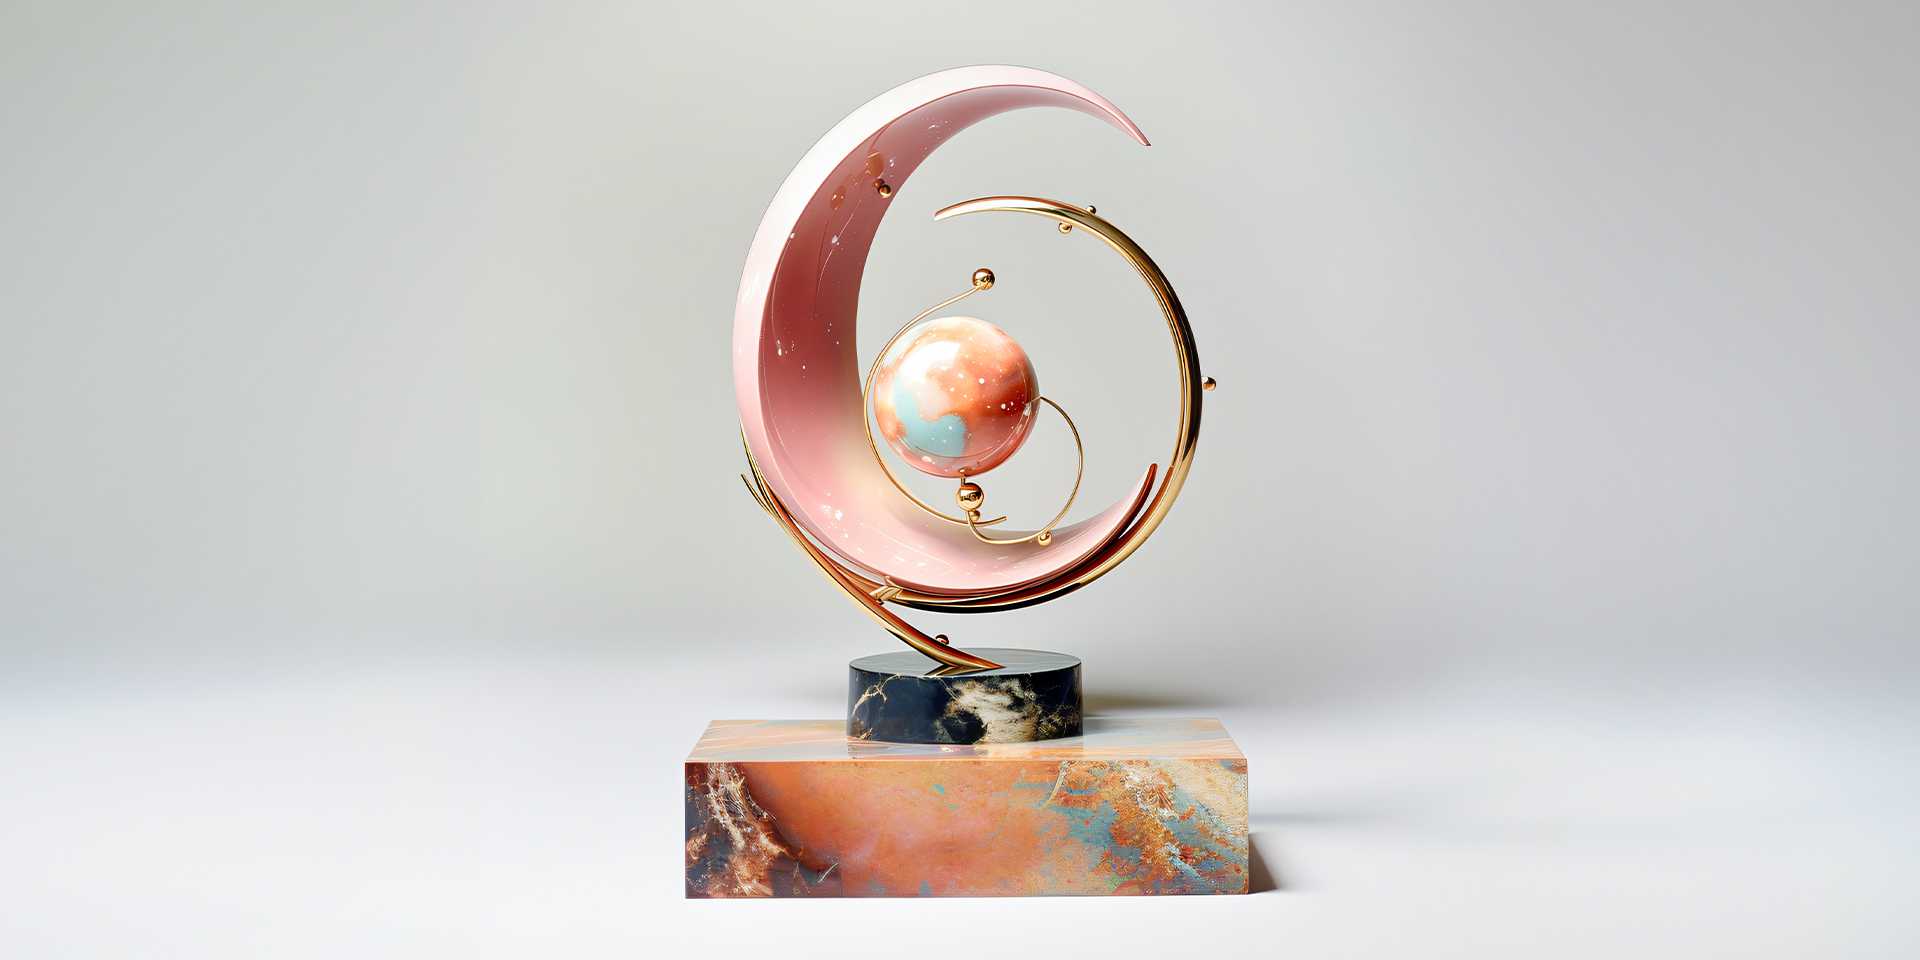 Sculpture standing on a marble base. Curvatures enclose a small globe standing in the center.